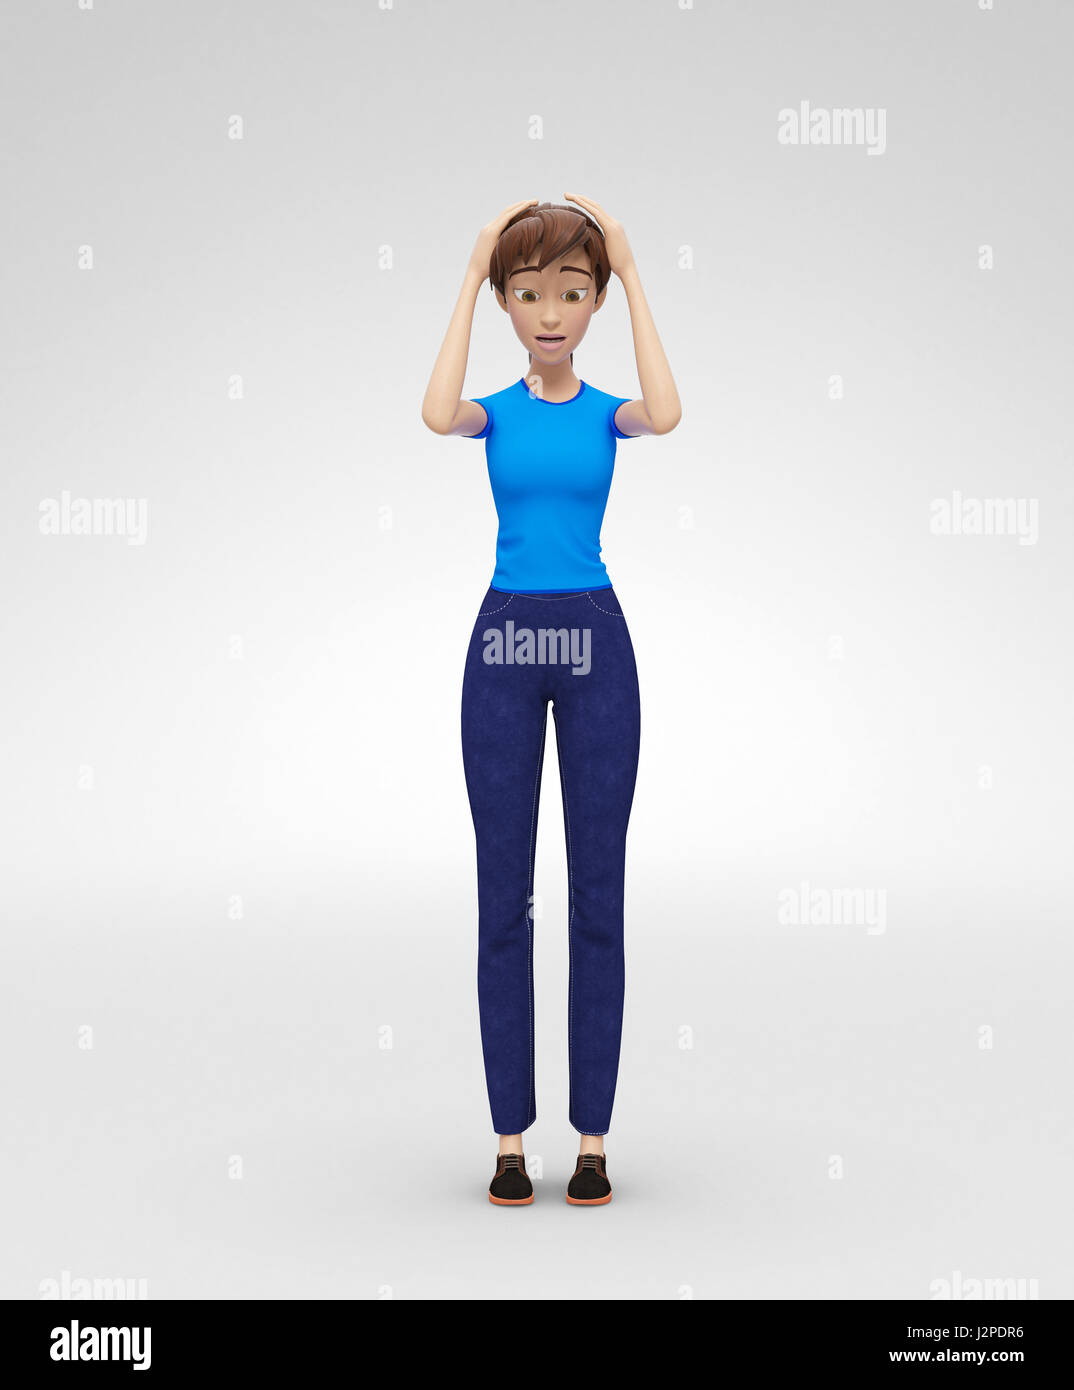 Panicky, Restless and Discouraged Jenny - 3D Cartoon Female Character Model - Scared, Puzzled by Problem, Lost with No Way Out Stock Photo